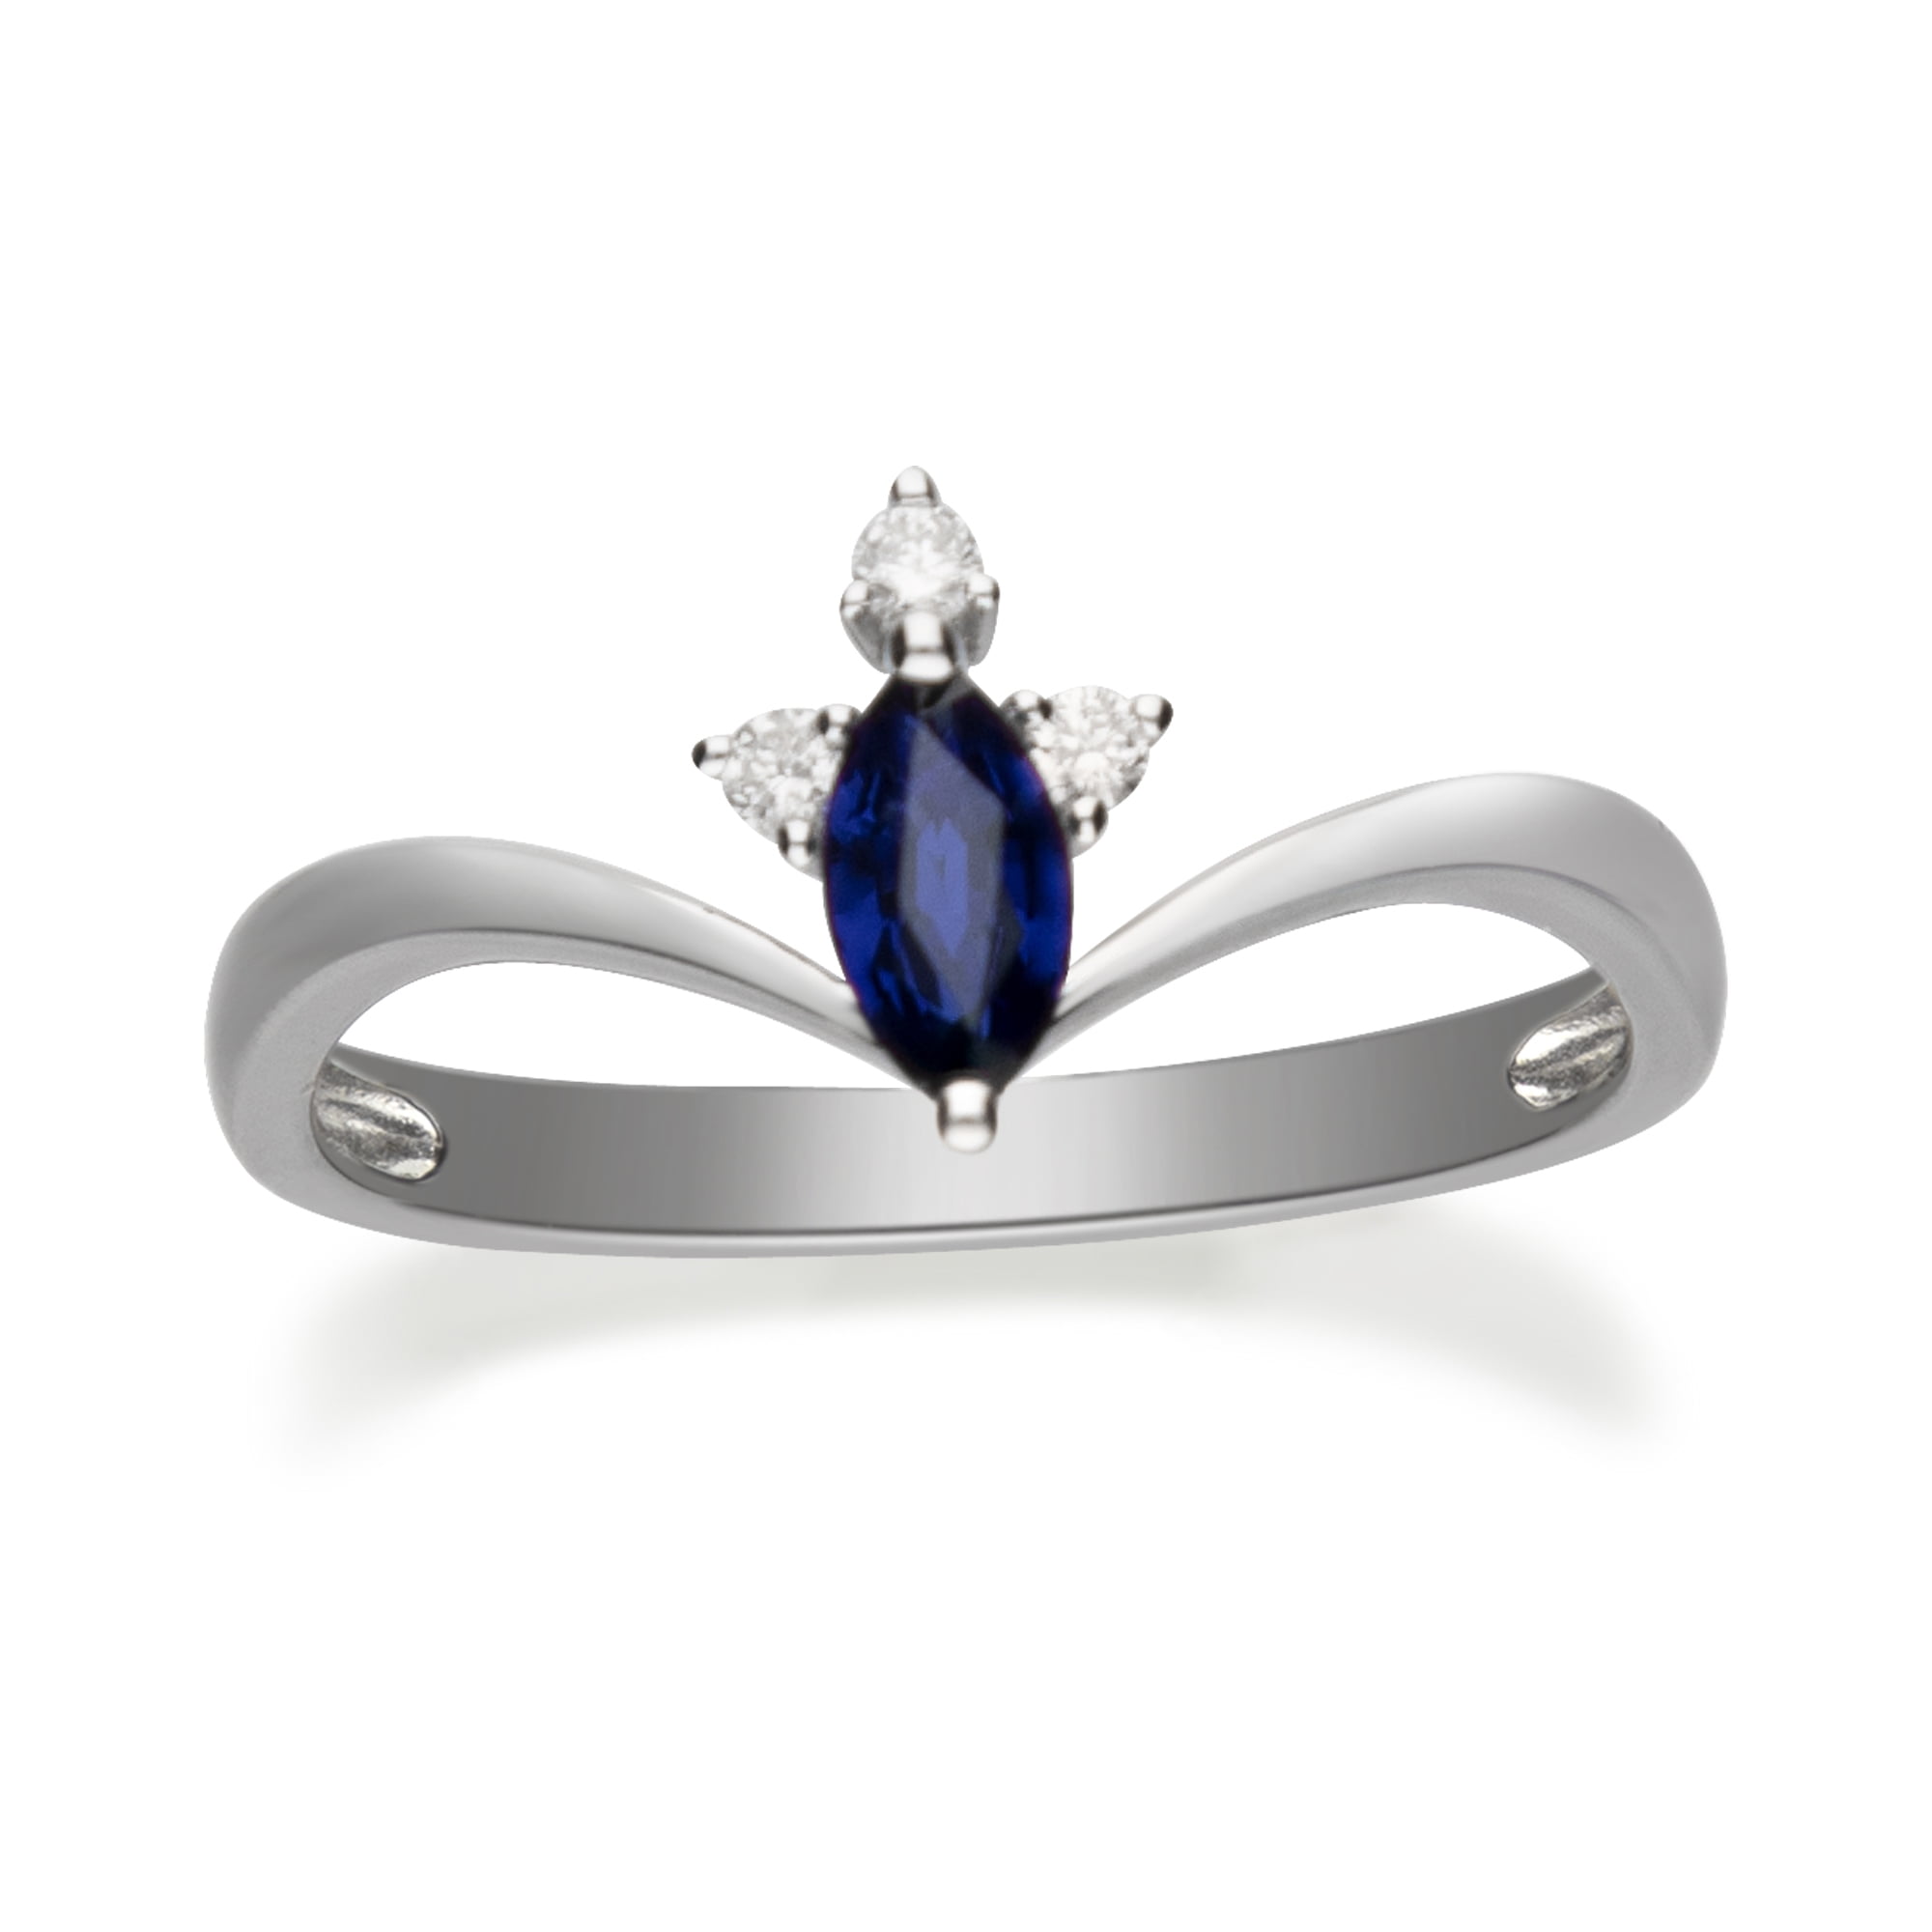 0.48 Carat Genuine Blue Sapphire And White Diamond 10K Yellow Gold Ring |  QR34295BSAPHWD-10KY | QuintessenceJewelry